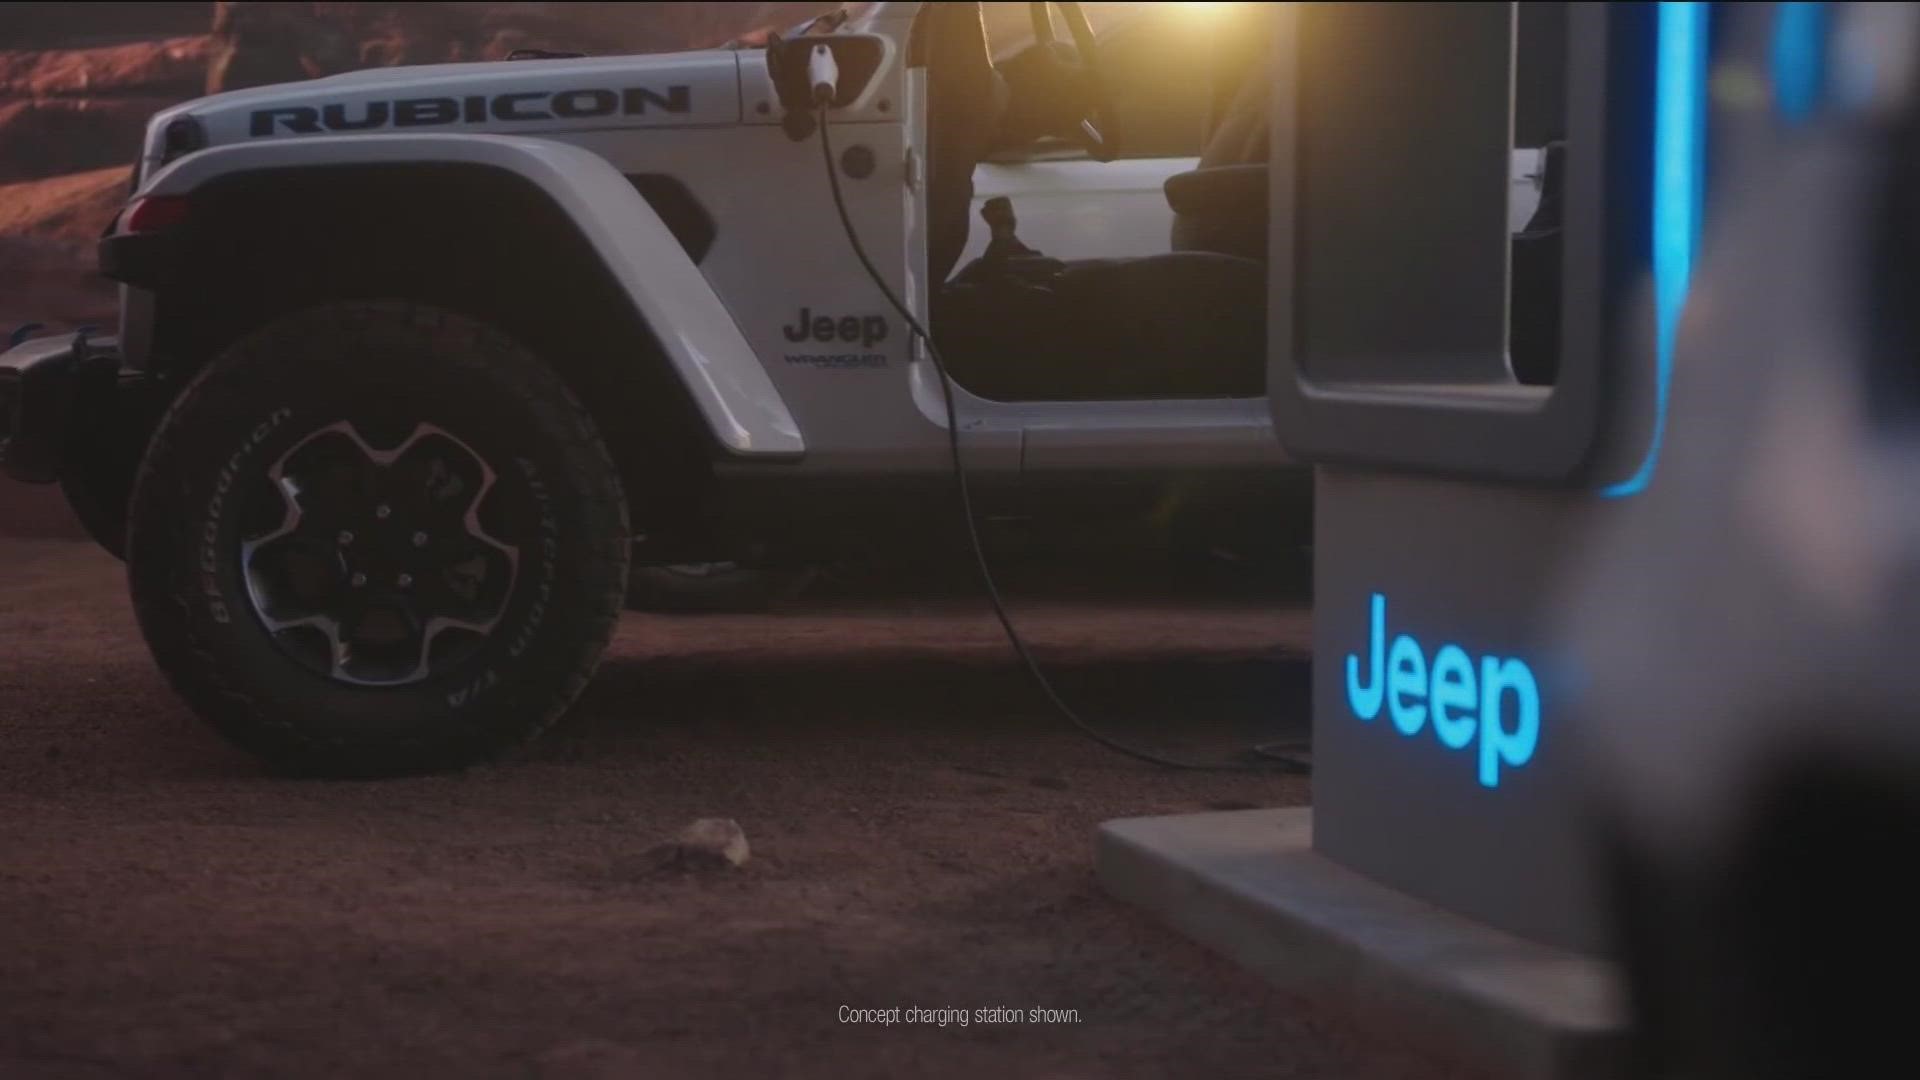 The new electric vehicles include the Jeep Recon, a four-wheel-drive midsize SUV about the size of the Jeep Wrangler and rival Ford's gas-powered Bronco Sport.